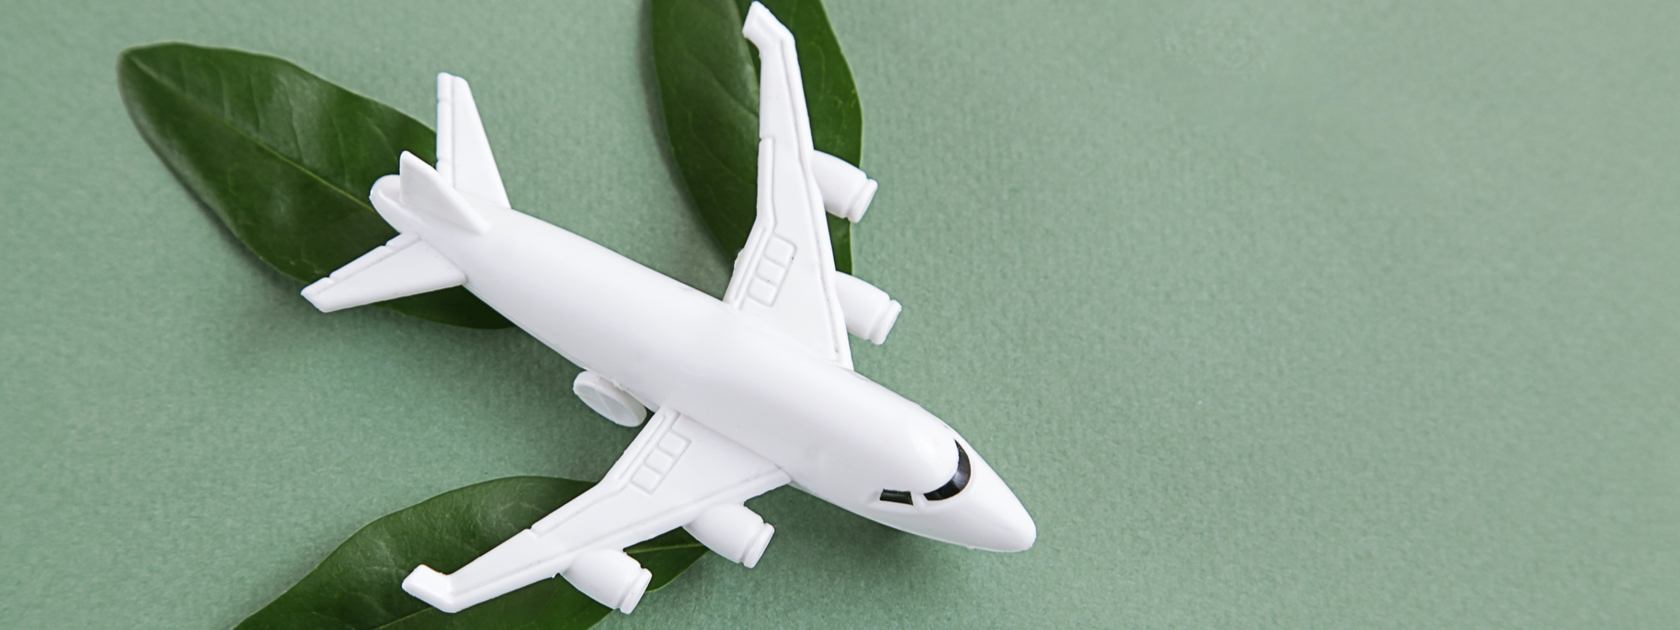 Image of a toy plane with green leaves under its wings and tail to signify greener flight.